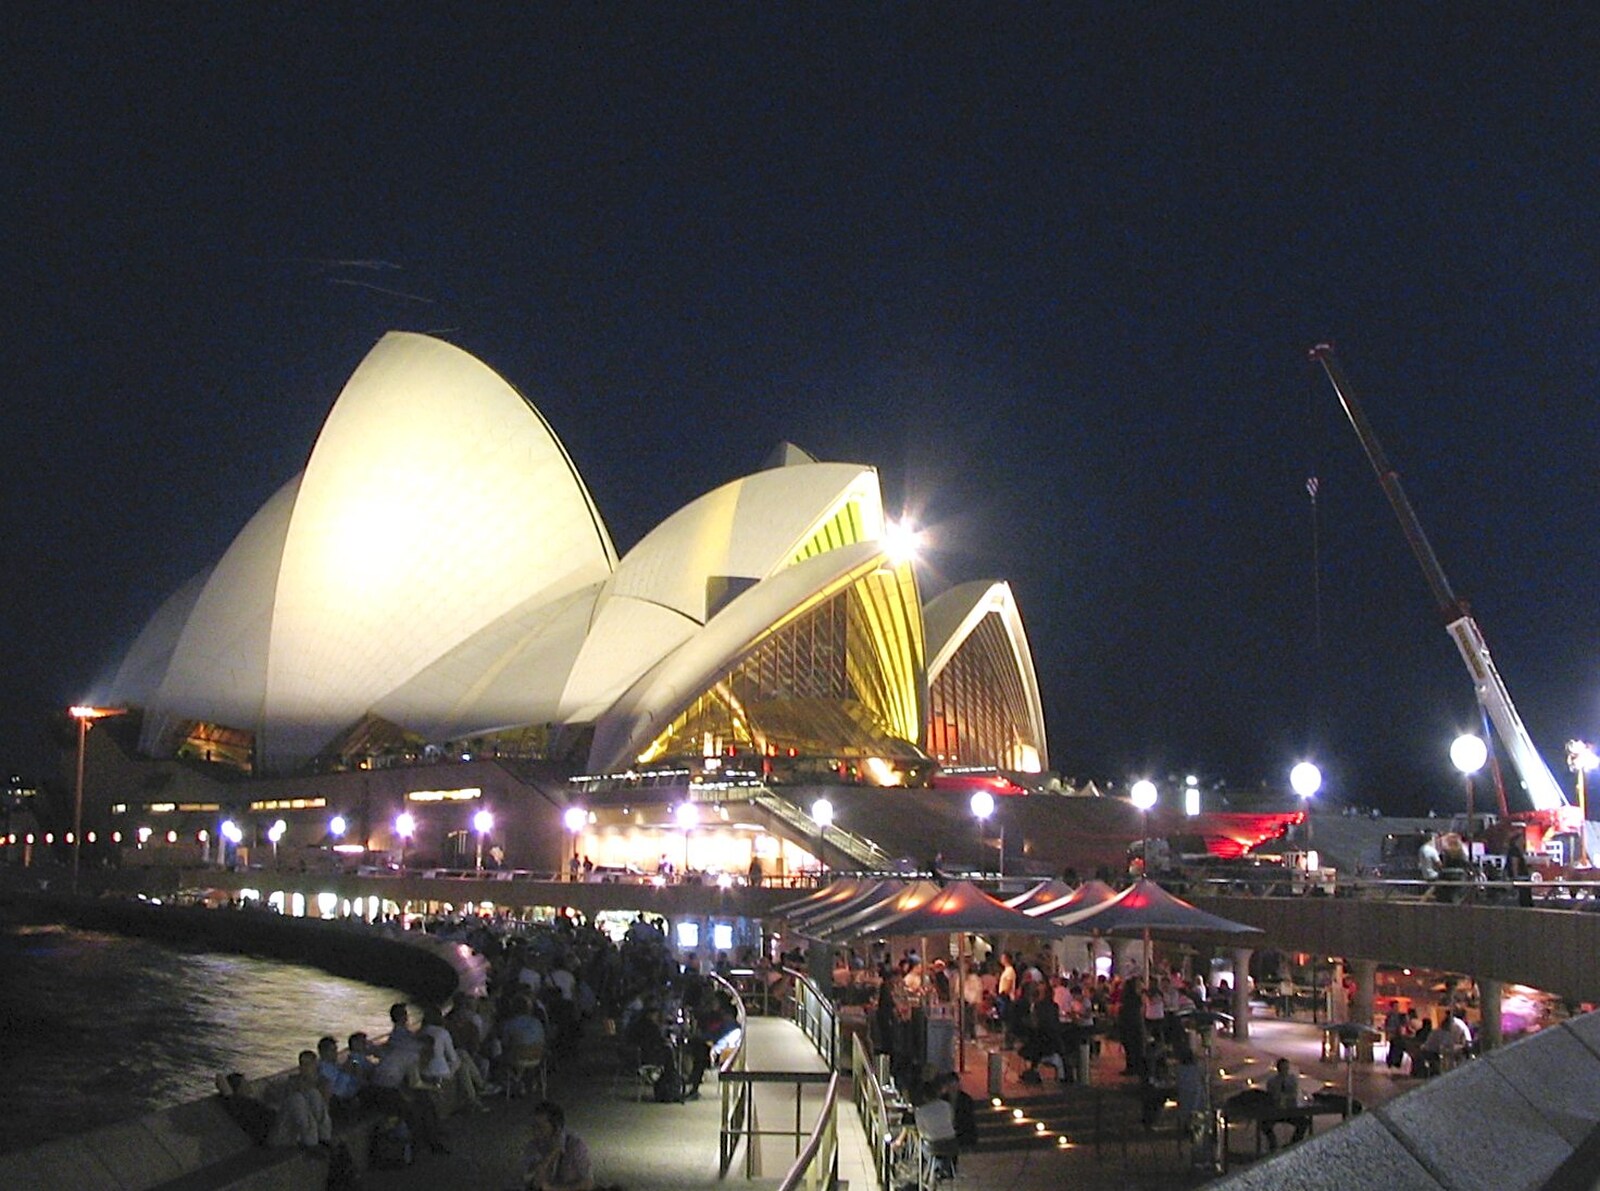 The Opera House by night from Sydney, New South Wales, Australia - 10th October 2004